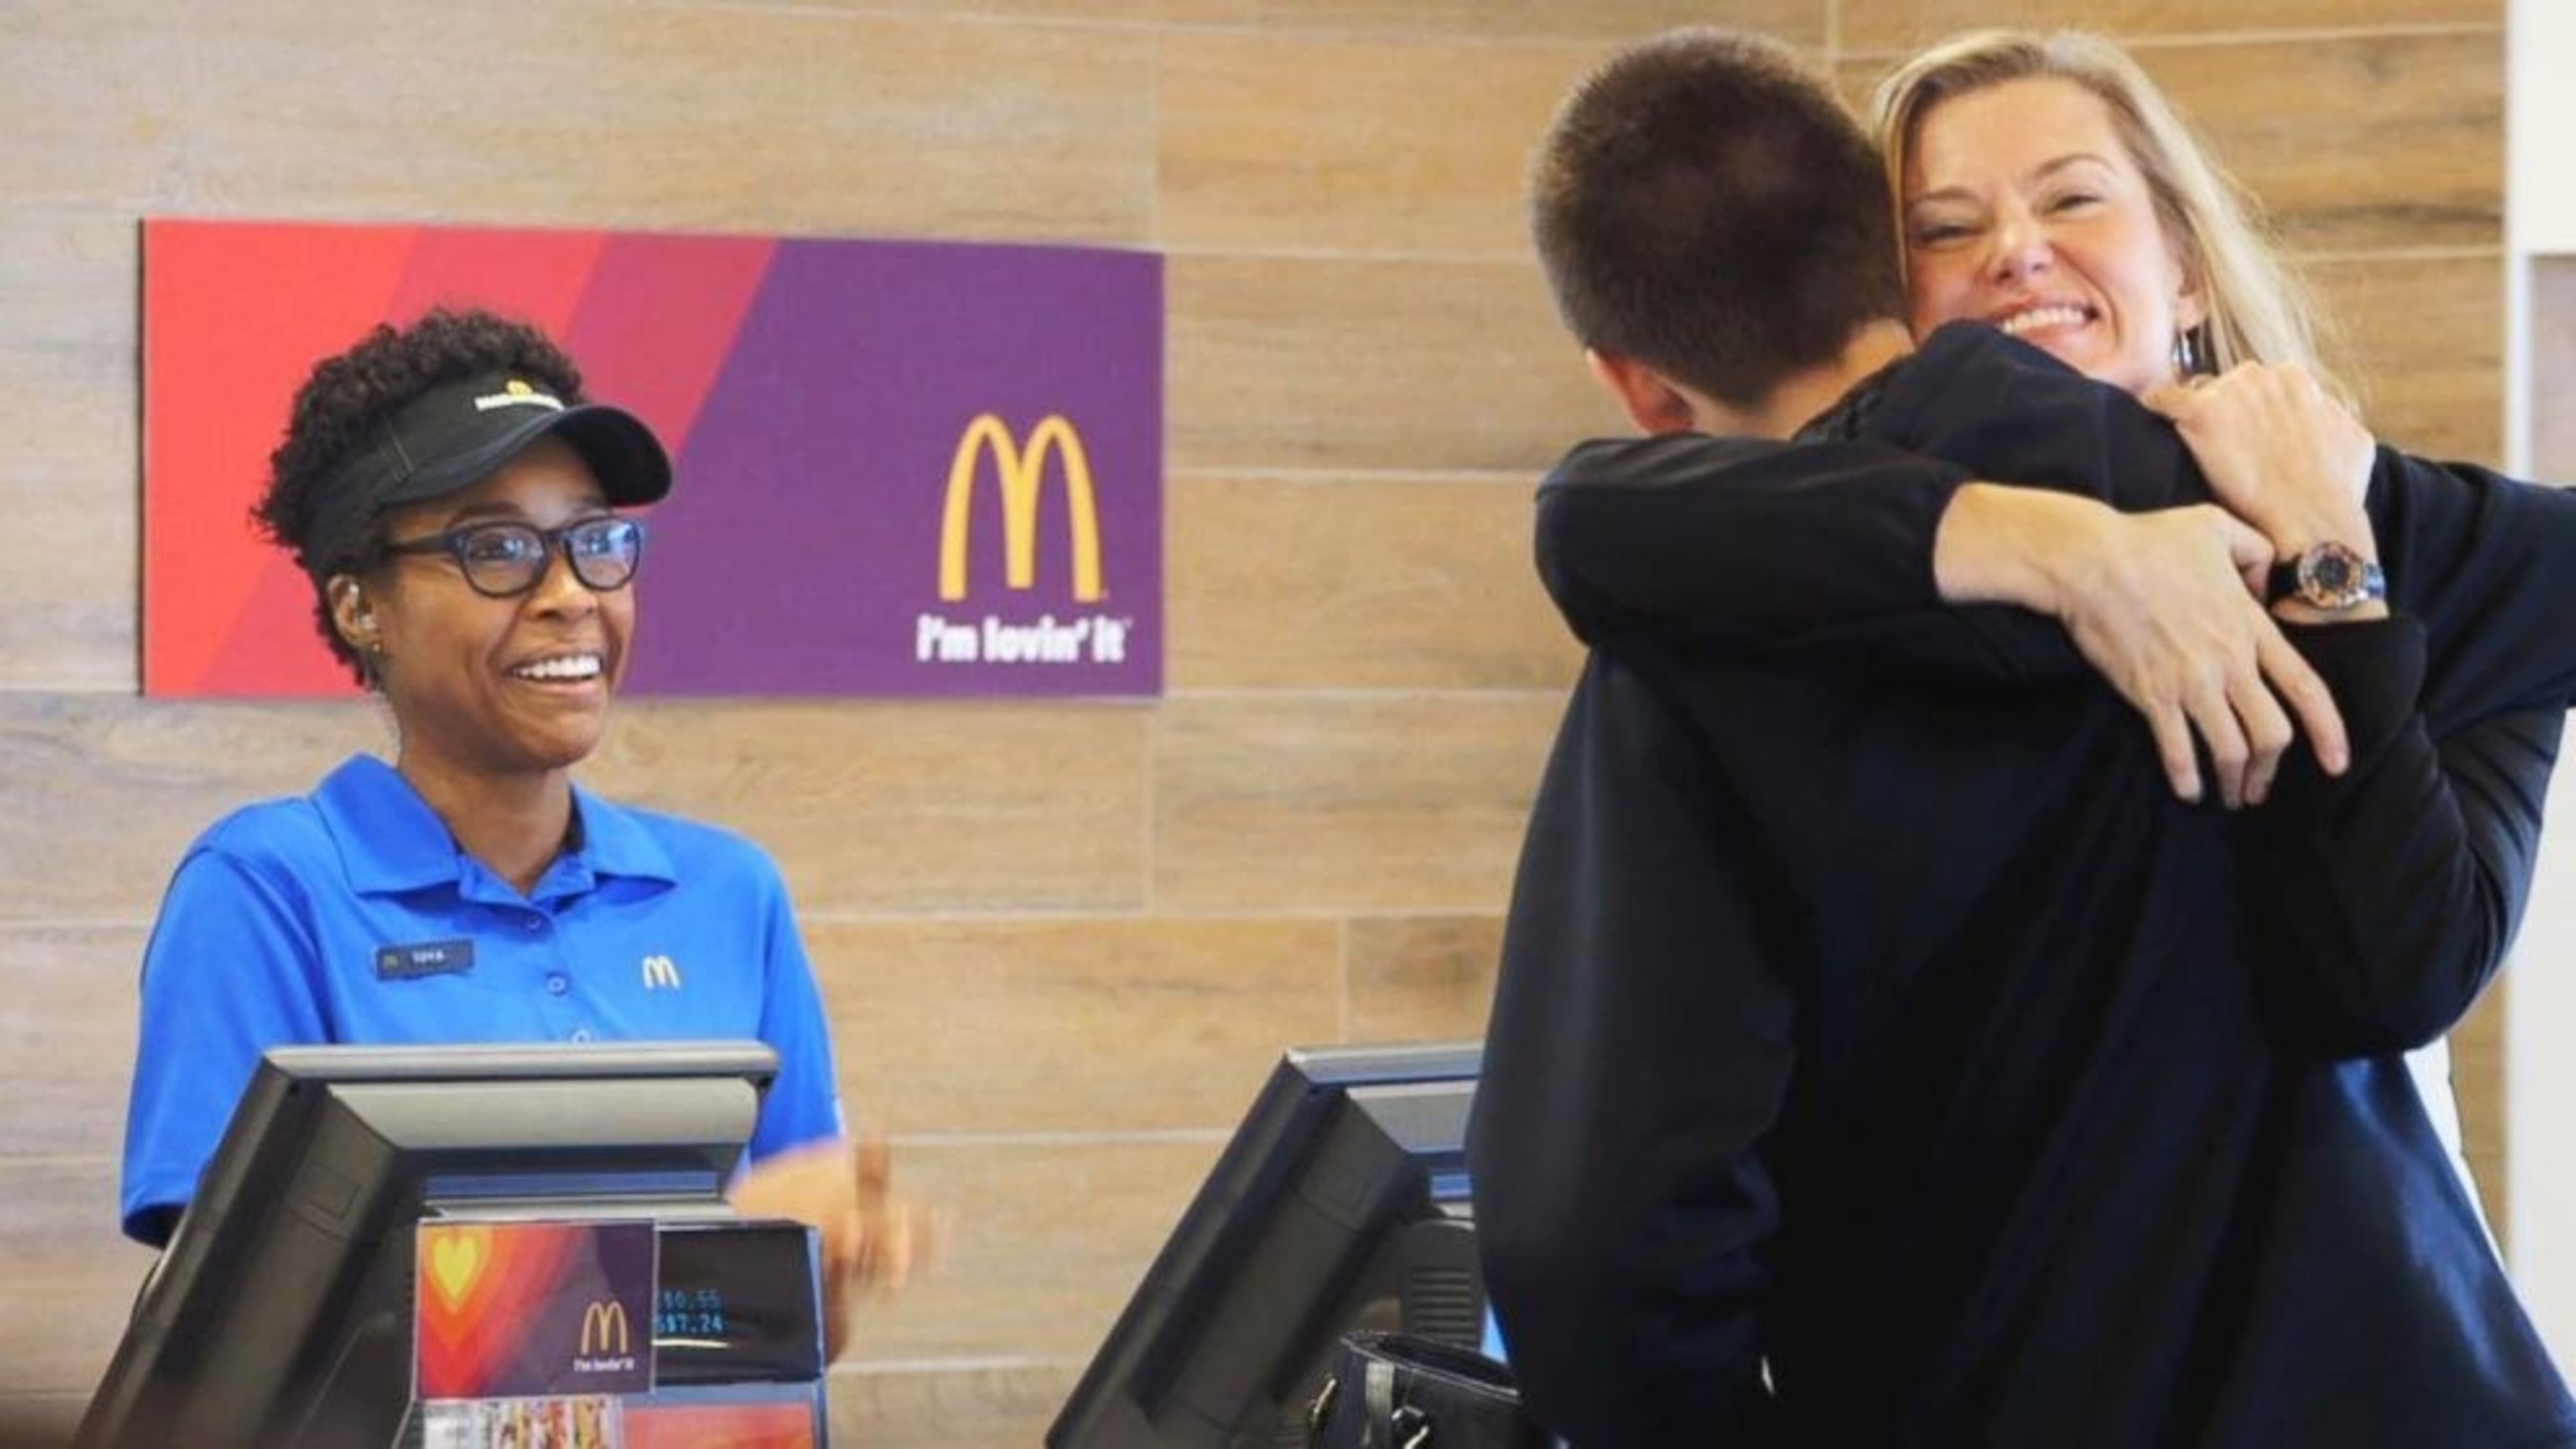 McDONALD'S SHARES LOVIN' WITH NEW YORK TRI-STATE CUSTOMERS